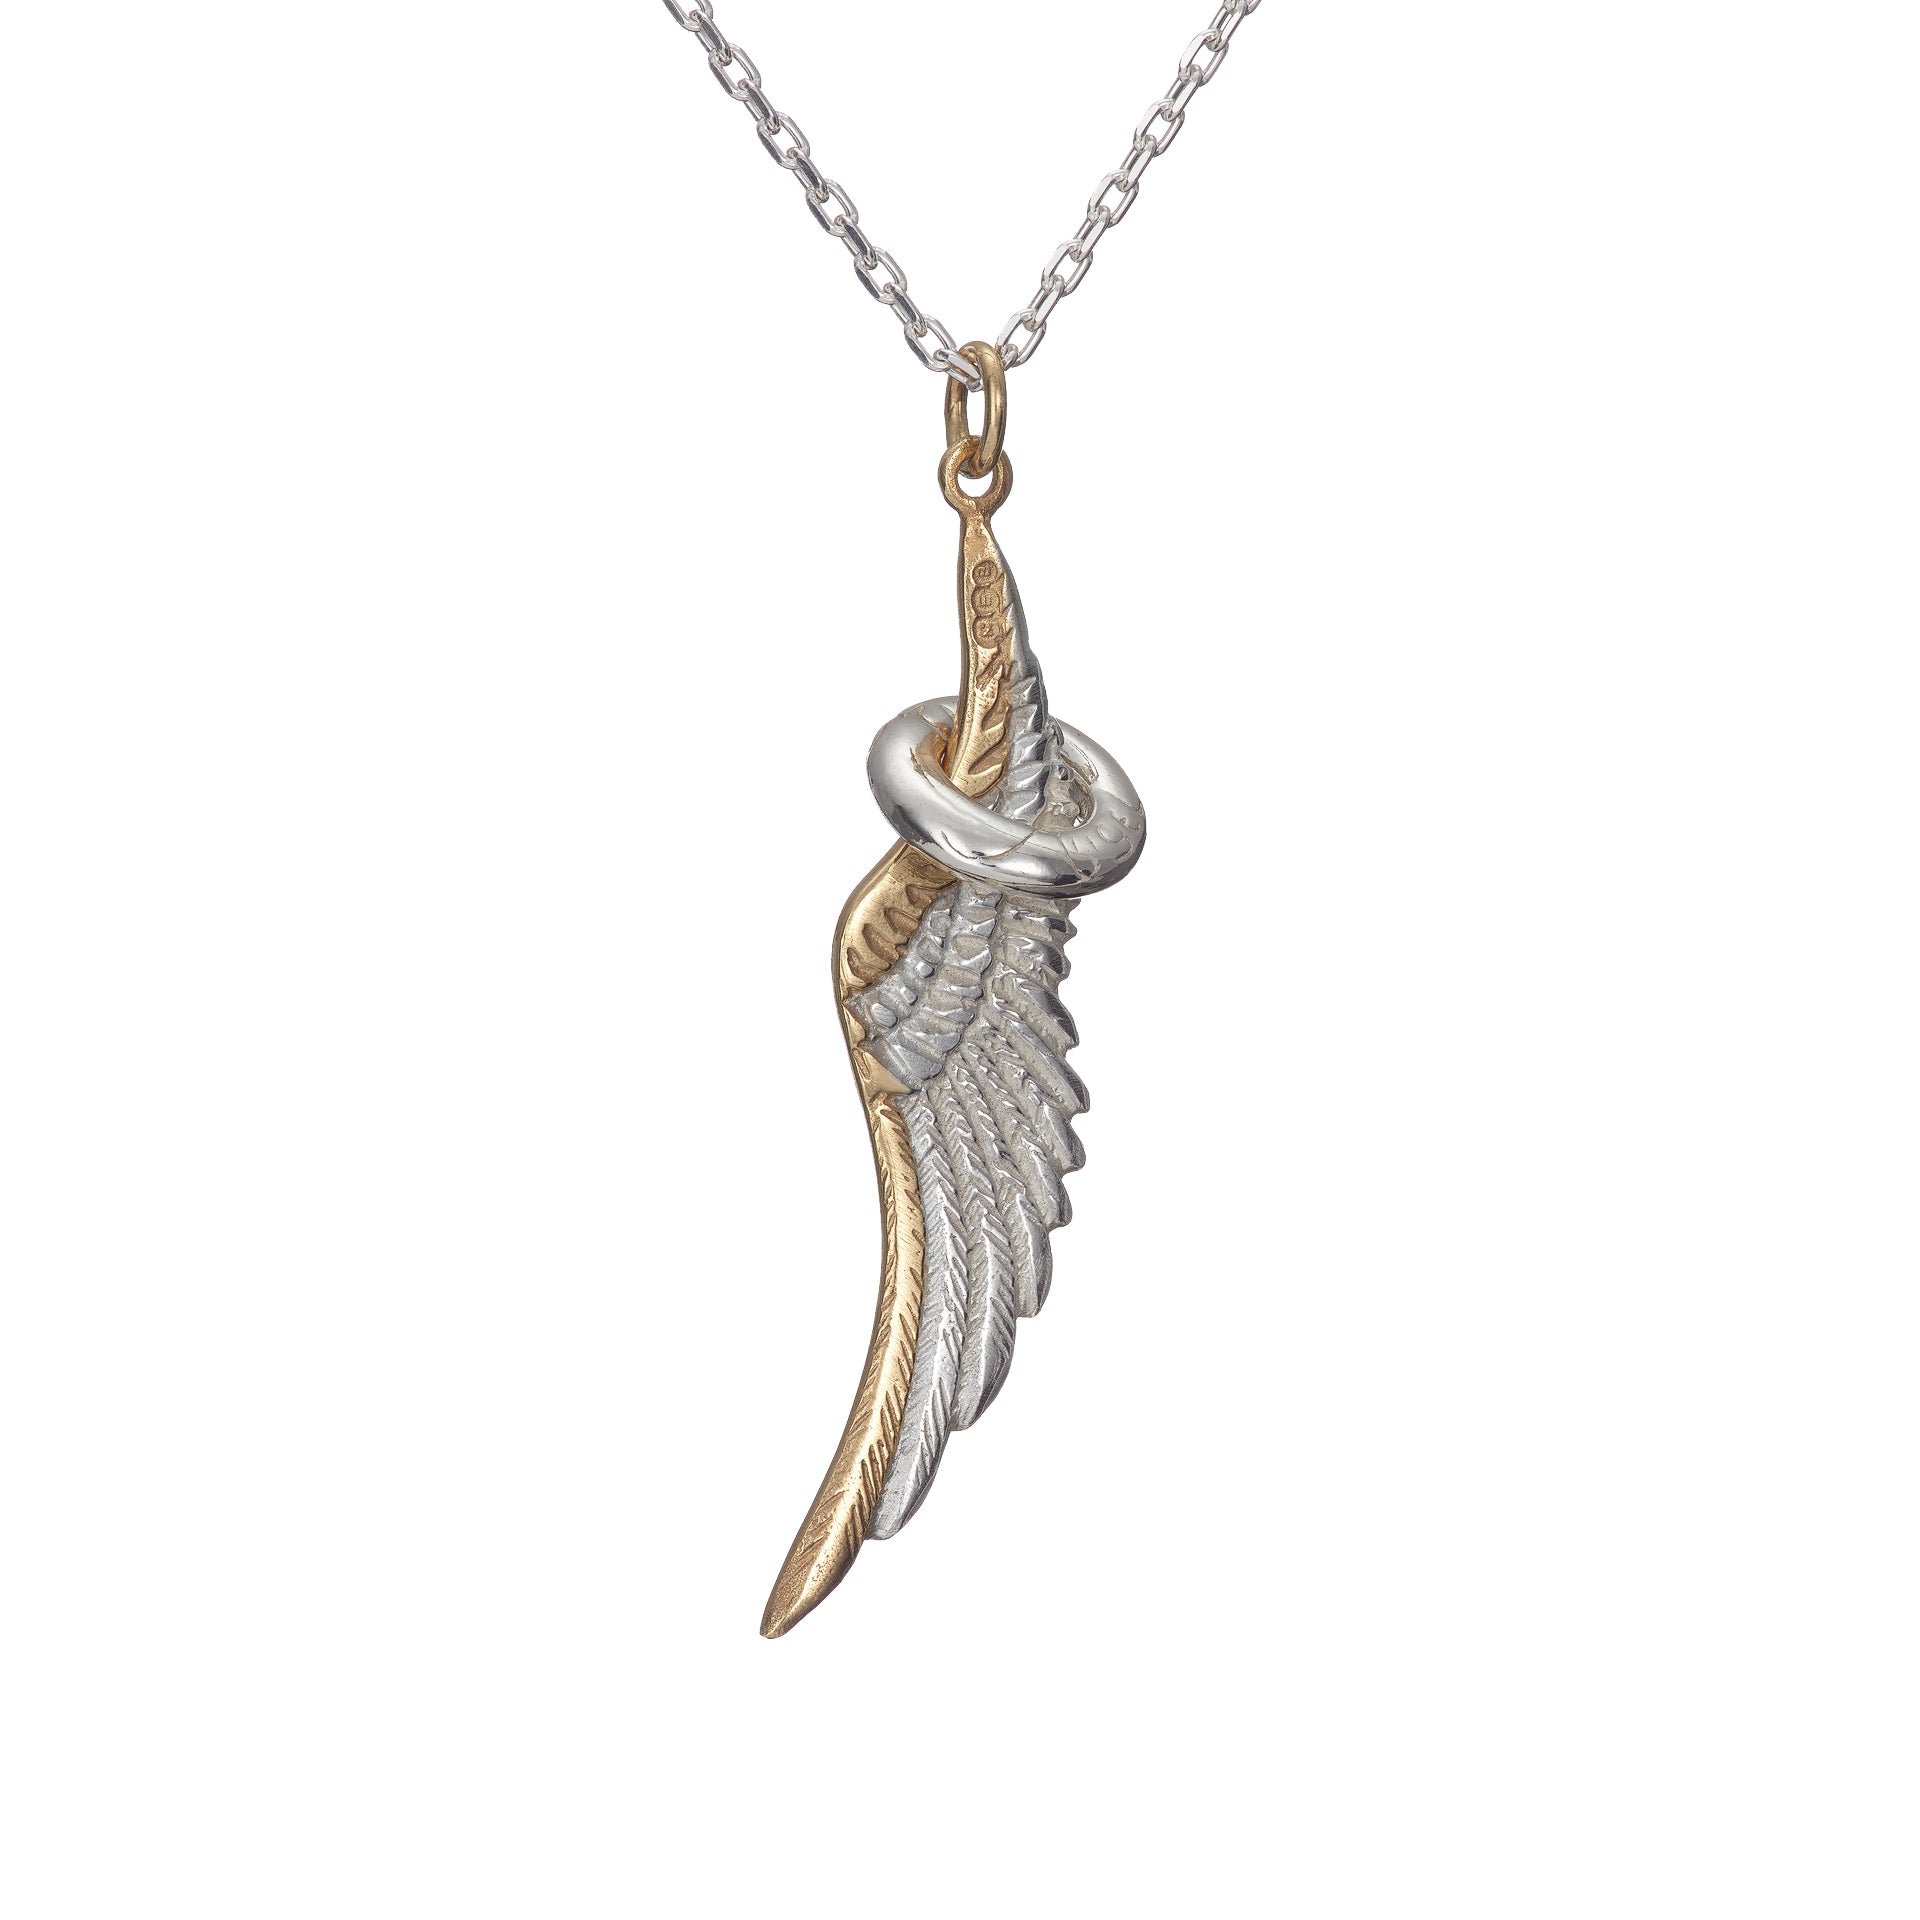 Guardian angel wing pendant, sterling silver handcrafted in Cavan by Elena Brennan Jewellery. Part of the My Angel jewelry collection